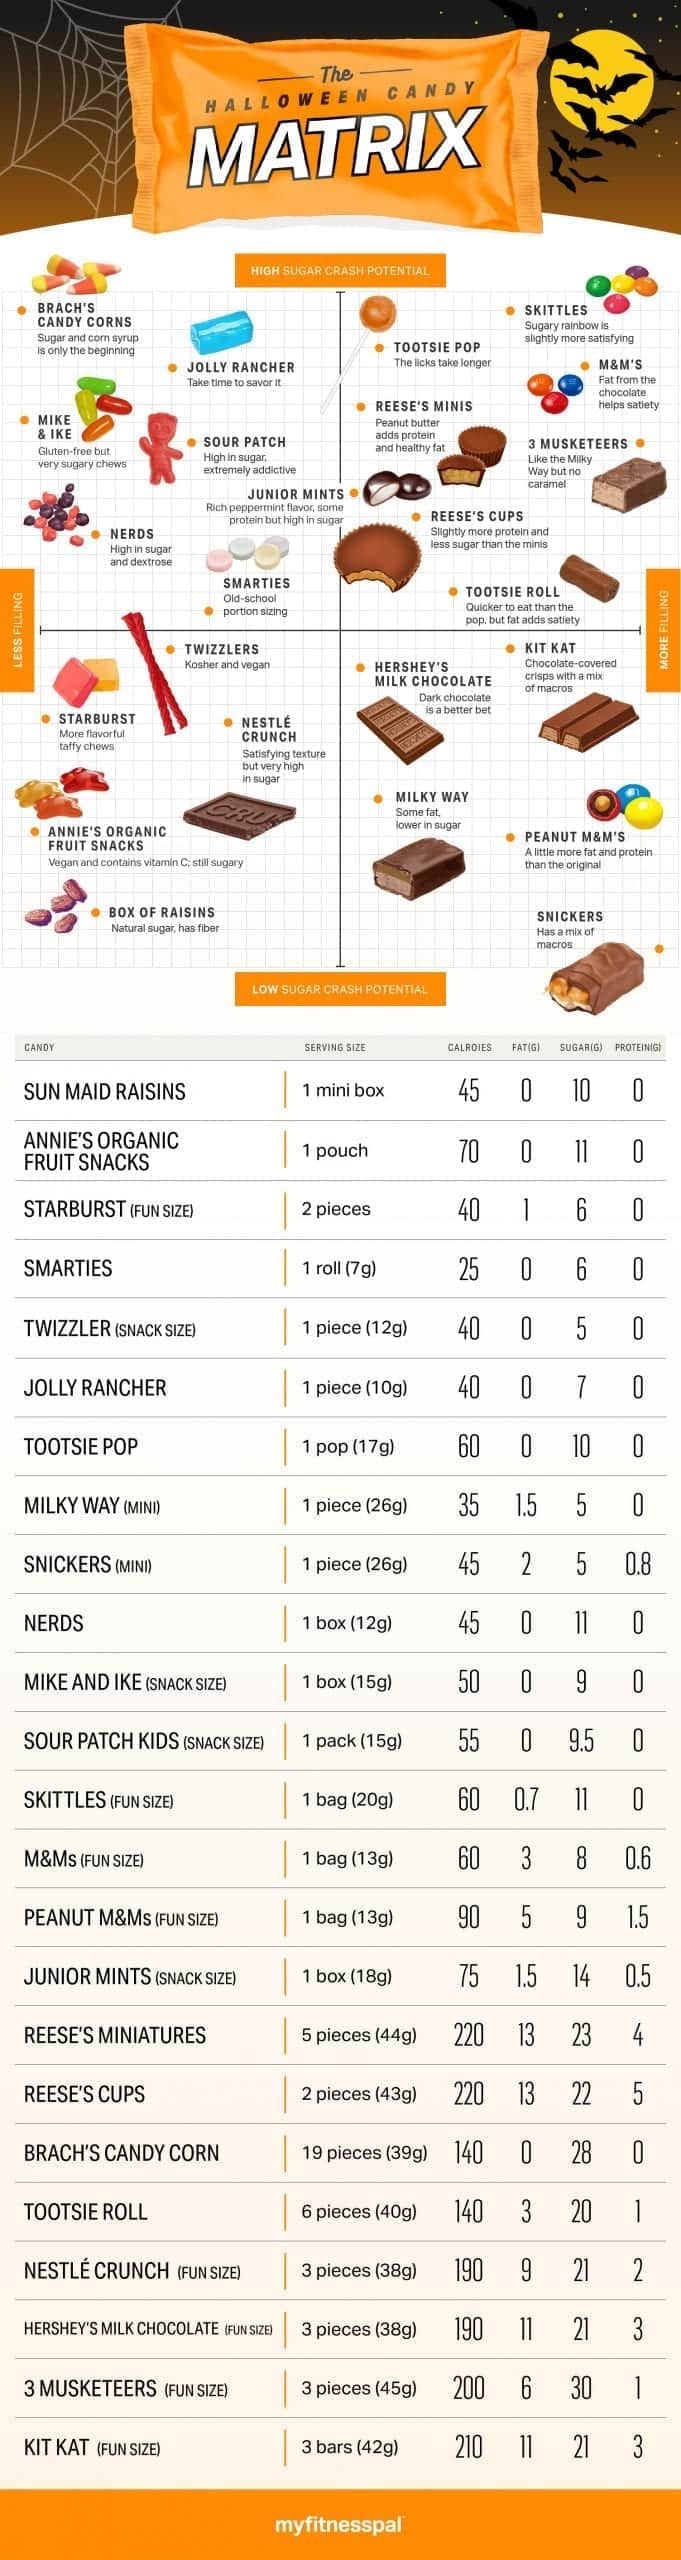 Halloween Candy Matrix: How Not-Bad-For-You is Your Favorite Candy?